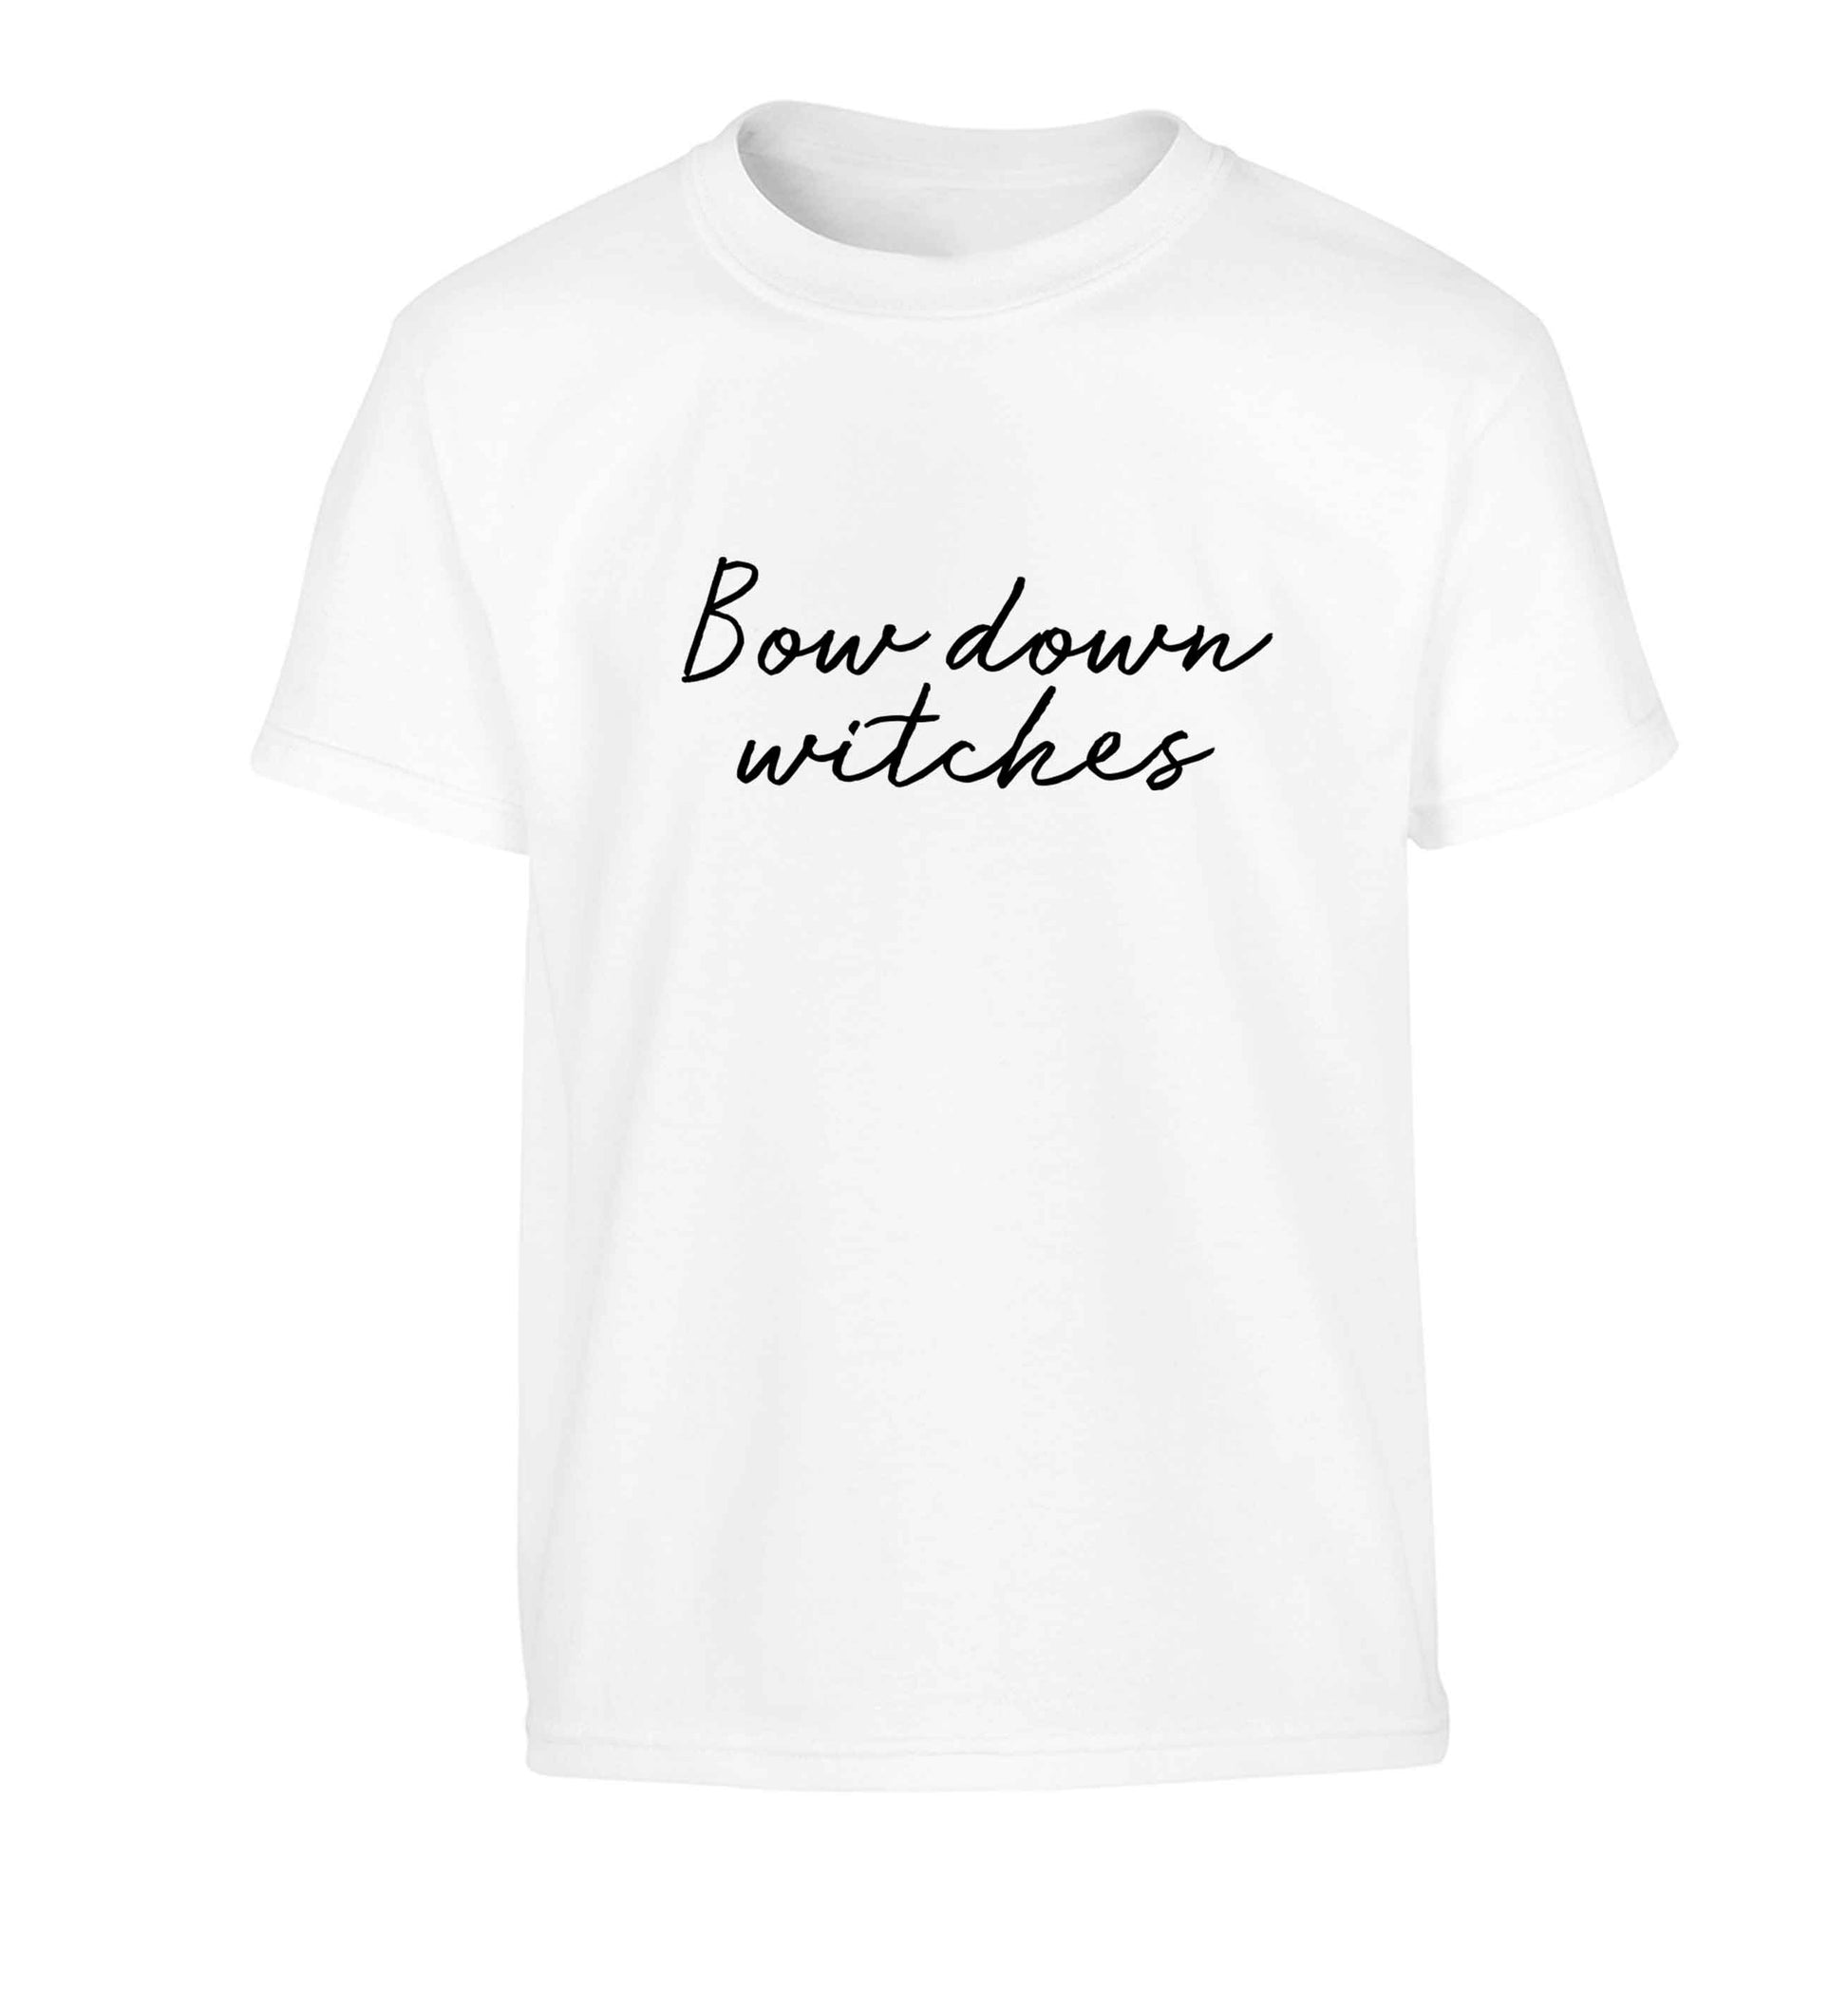 Bow down witches Children's white Tshirt 12-13 Years